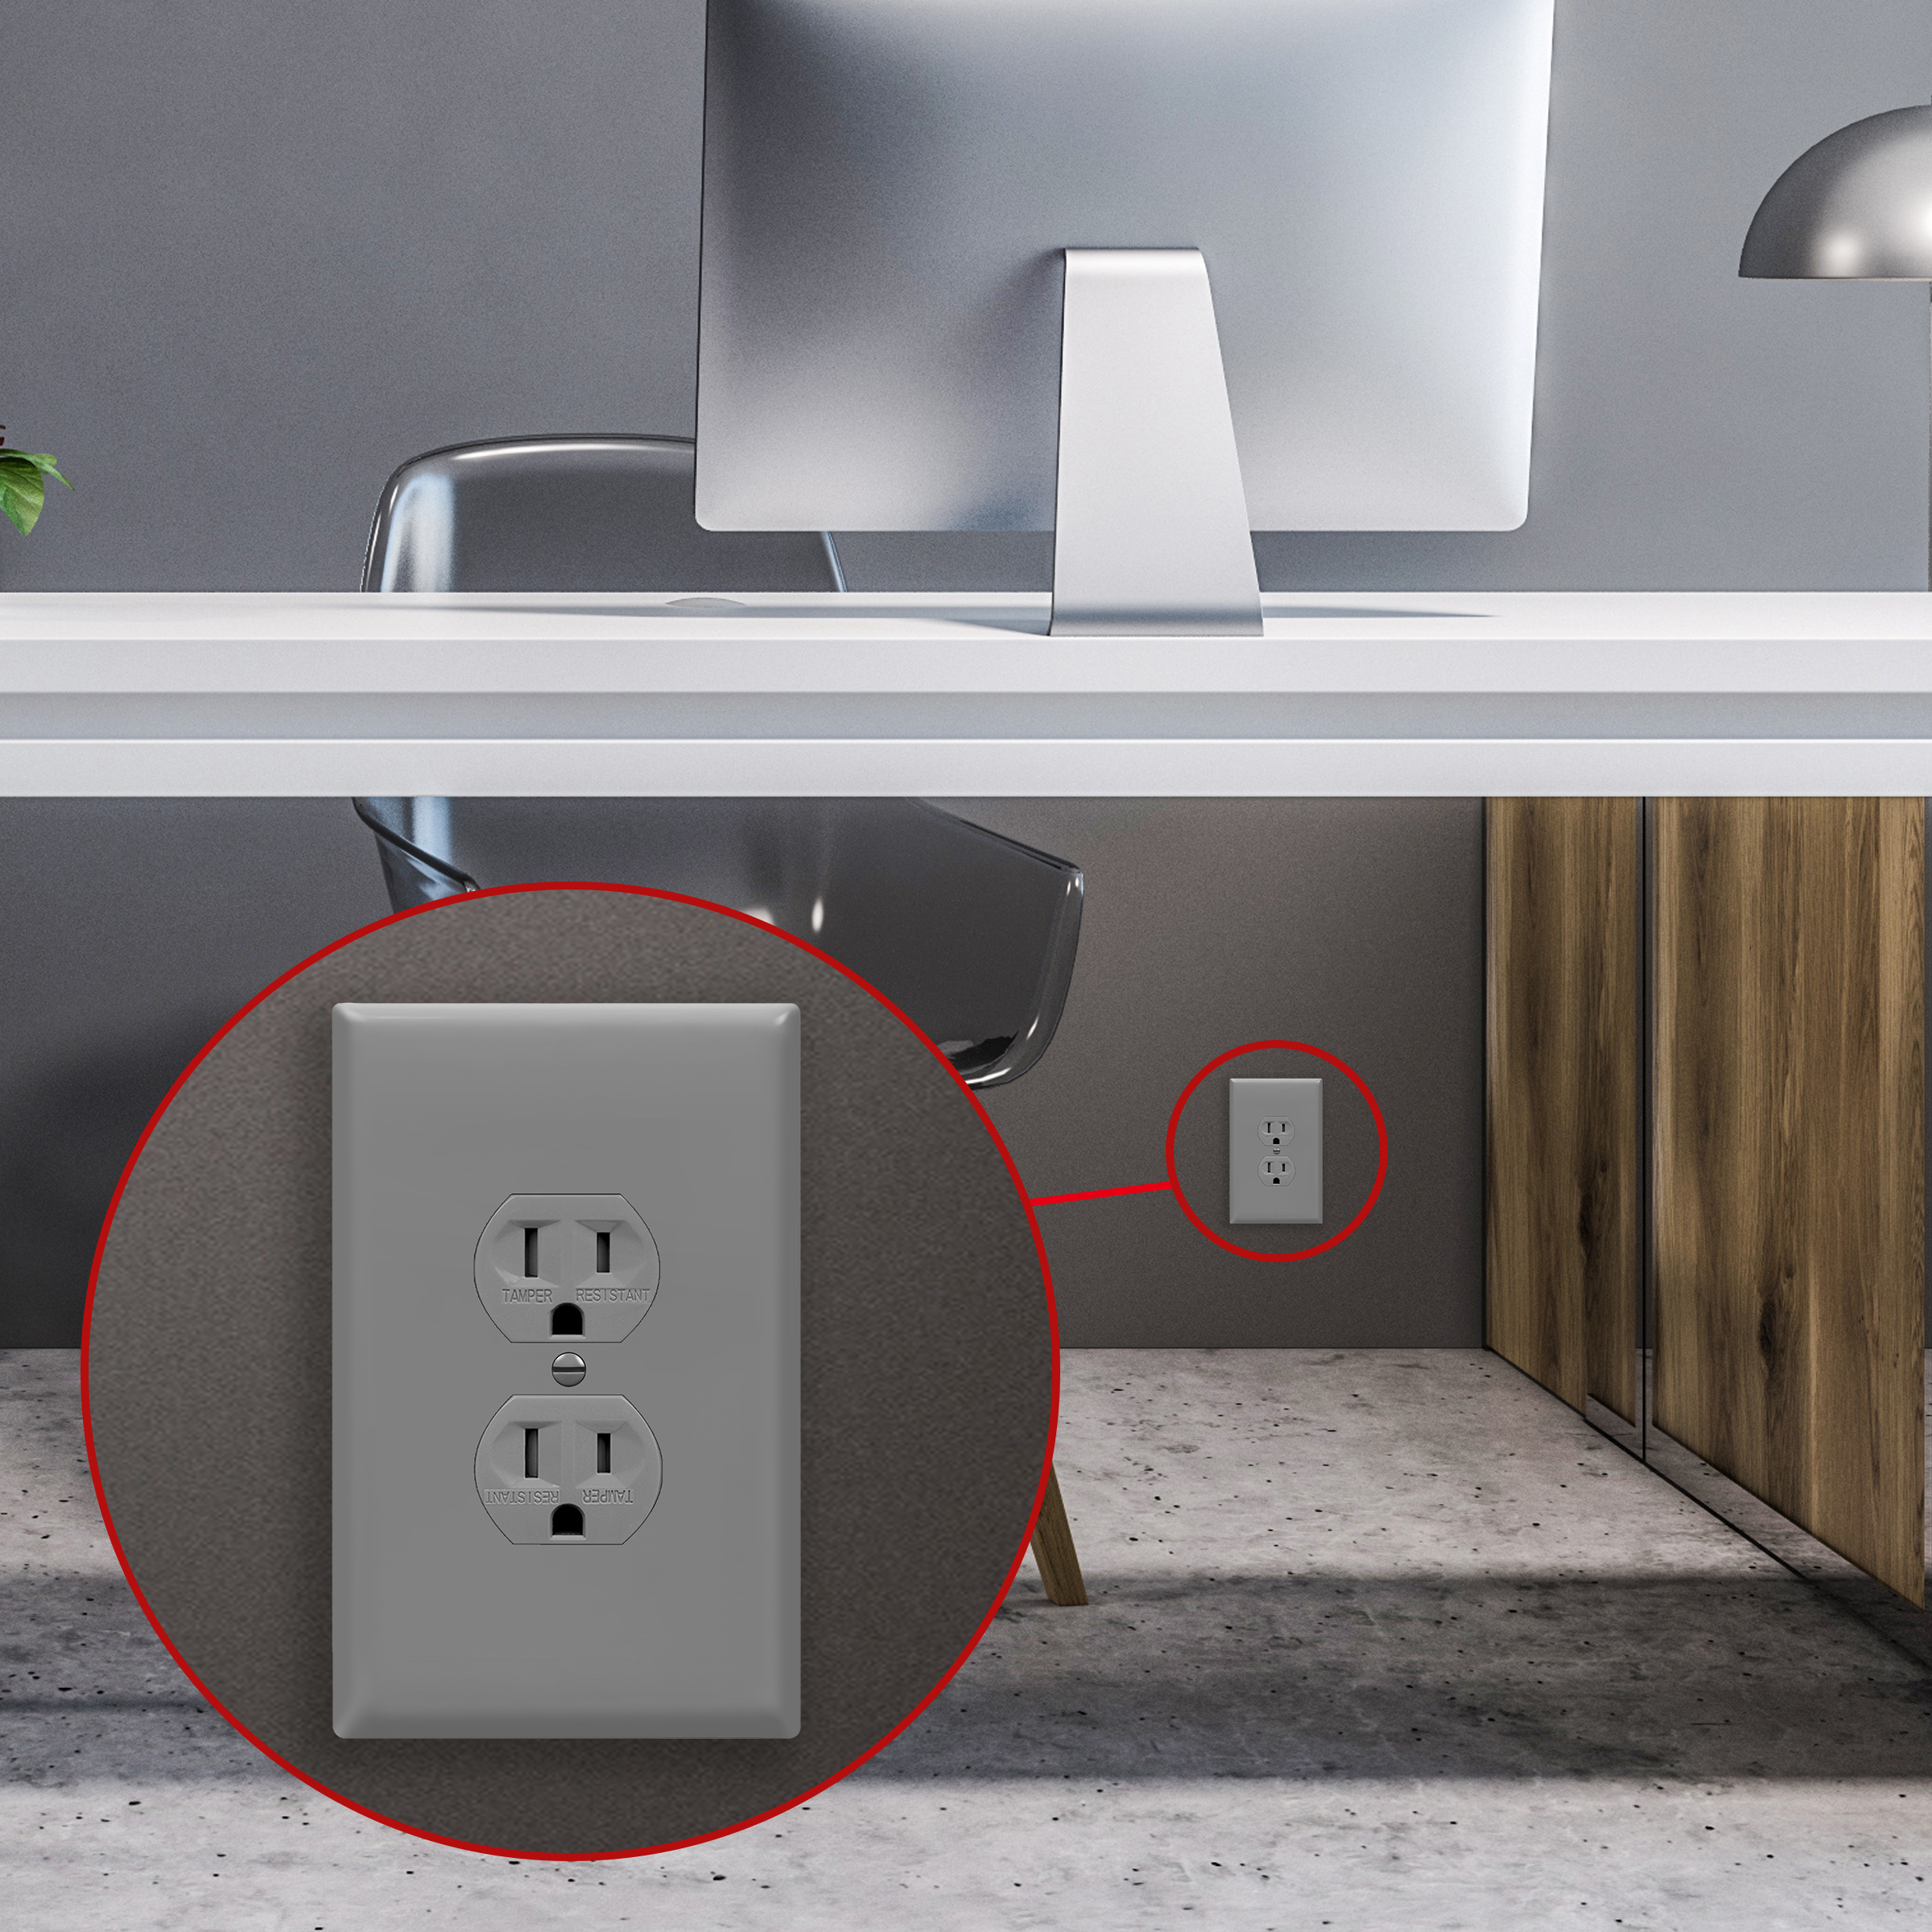 ENERLITES Duplex Receptacle Outlet Wall Plate, Jumbo Electrical Outlet Cover, Gloss Finish, Oversized 1-Gang, Polycarbonate Thermoplastic, 8821O-GY, Gray - image 4 of 5